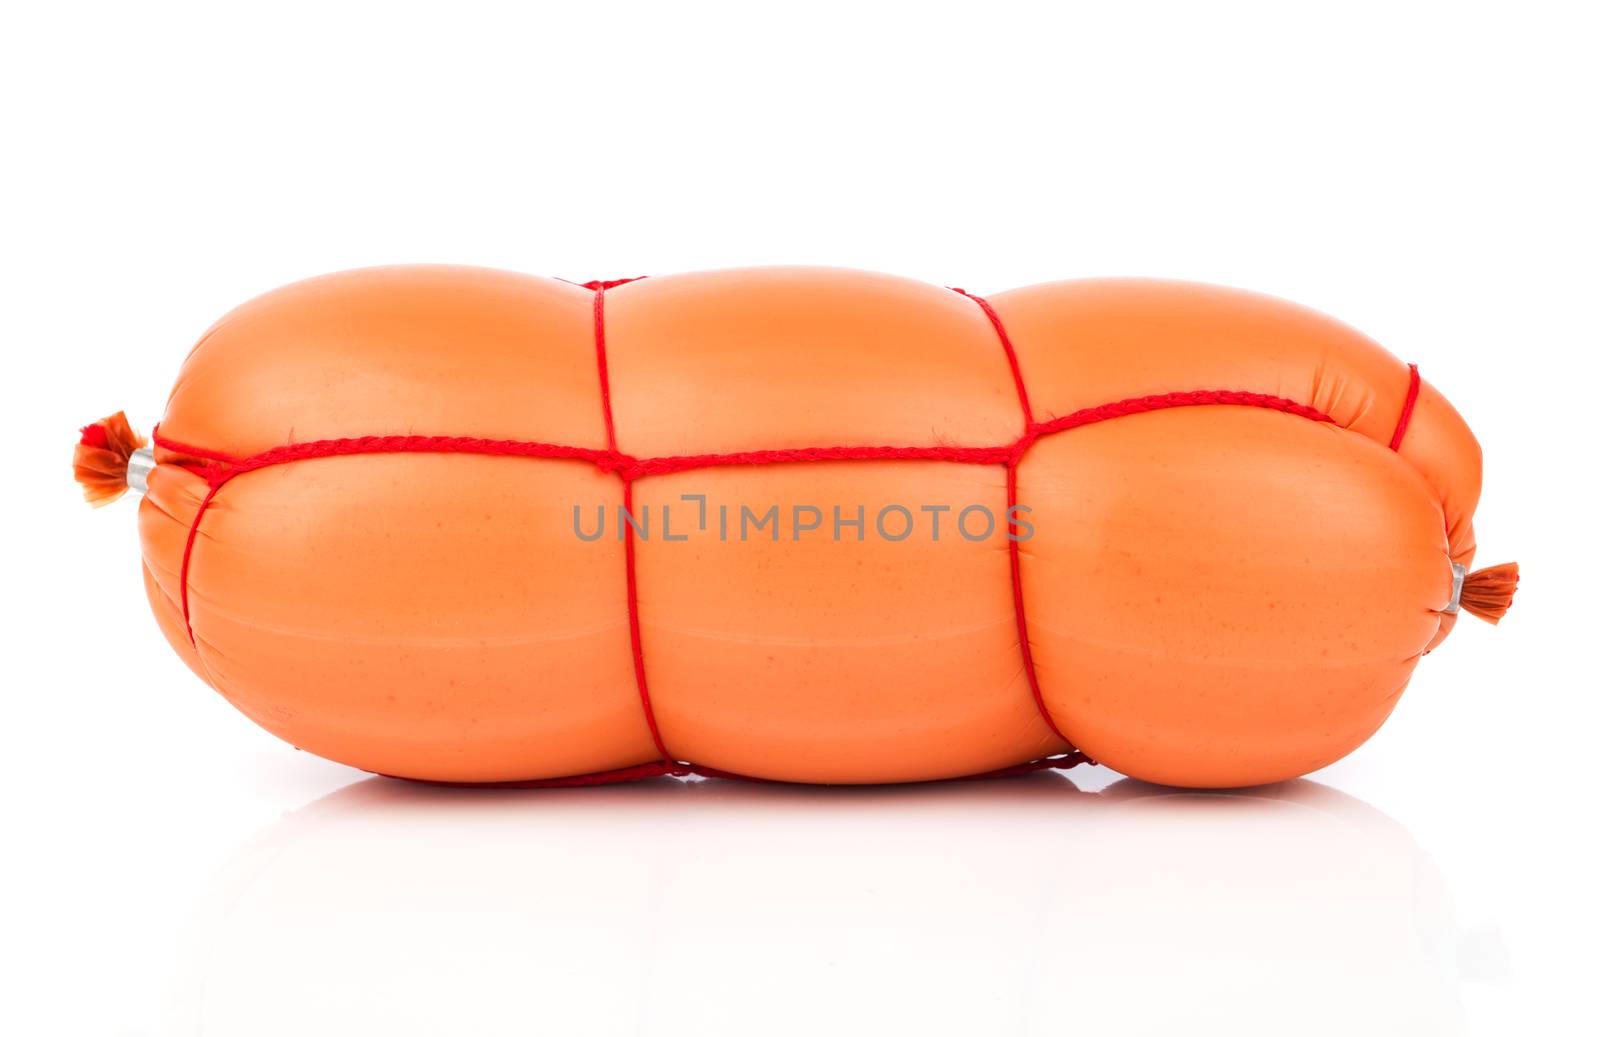 sausage isolated on white background by motorolka